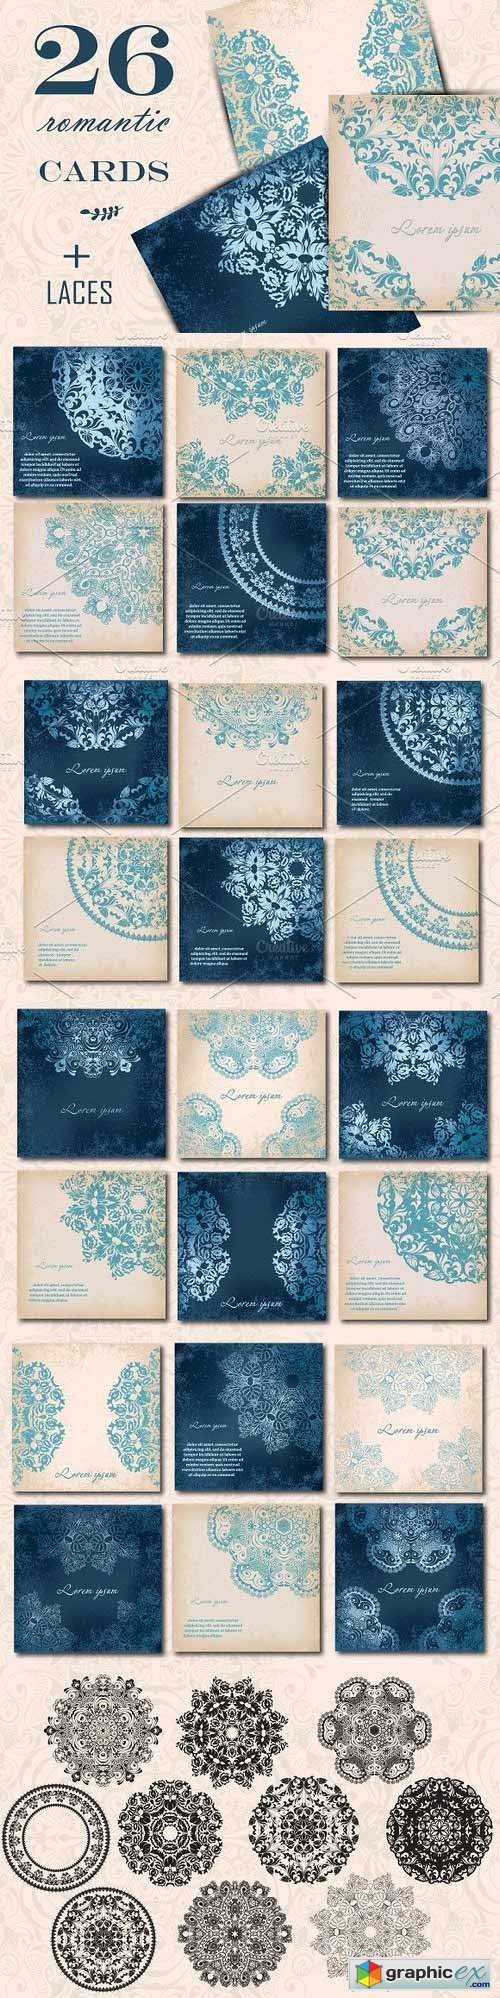 Rownd Lace Cards